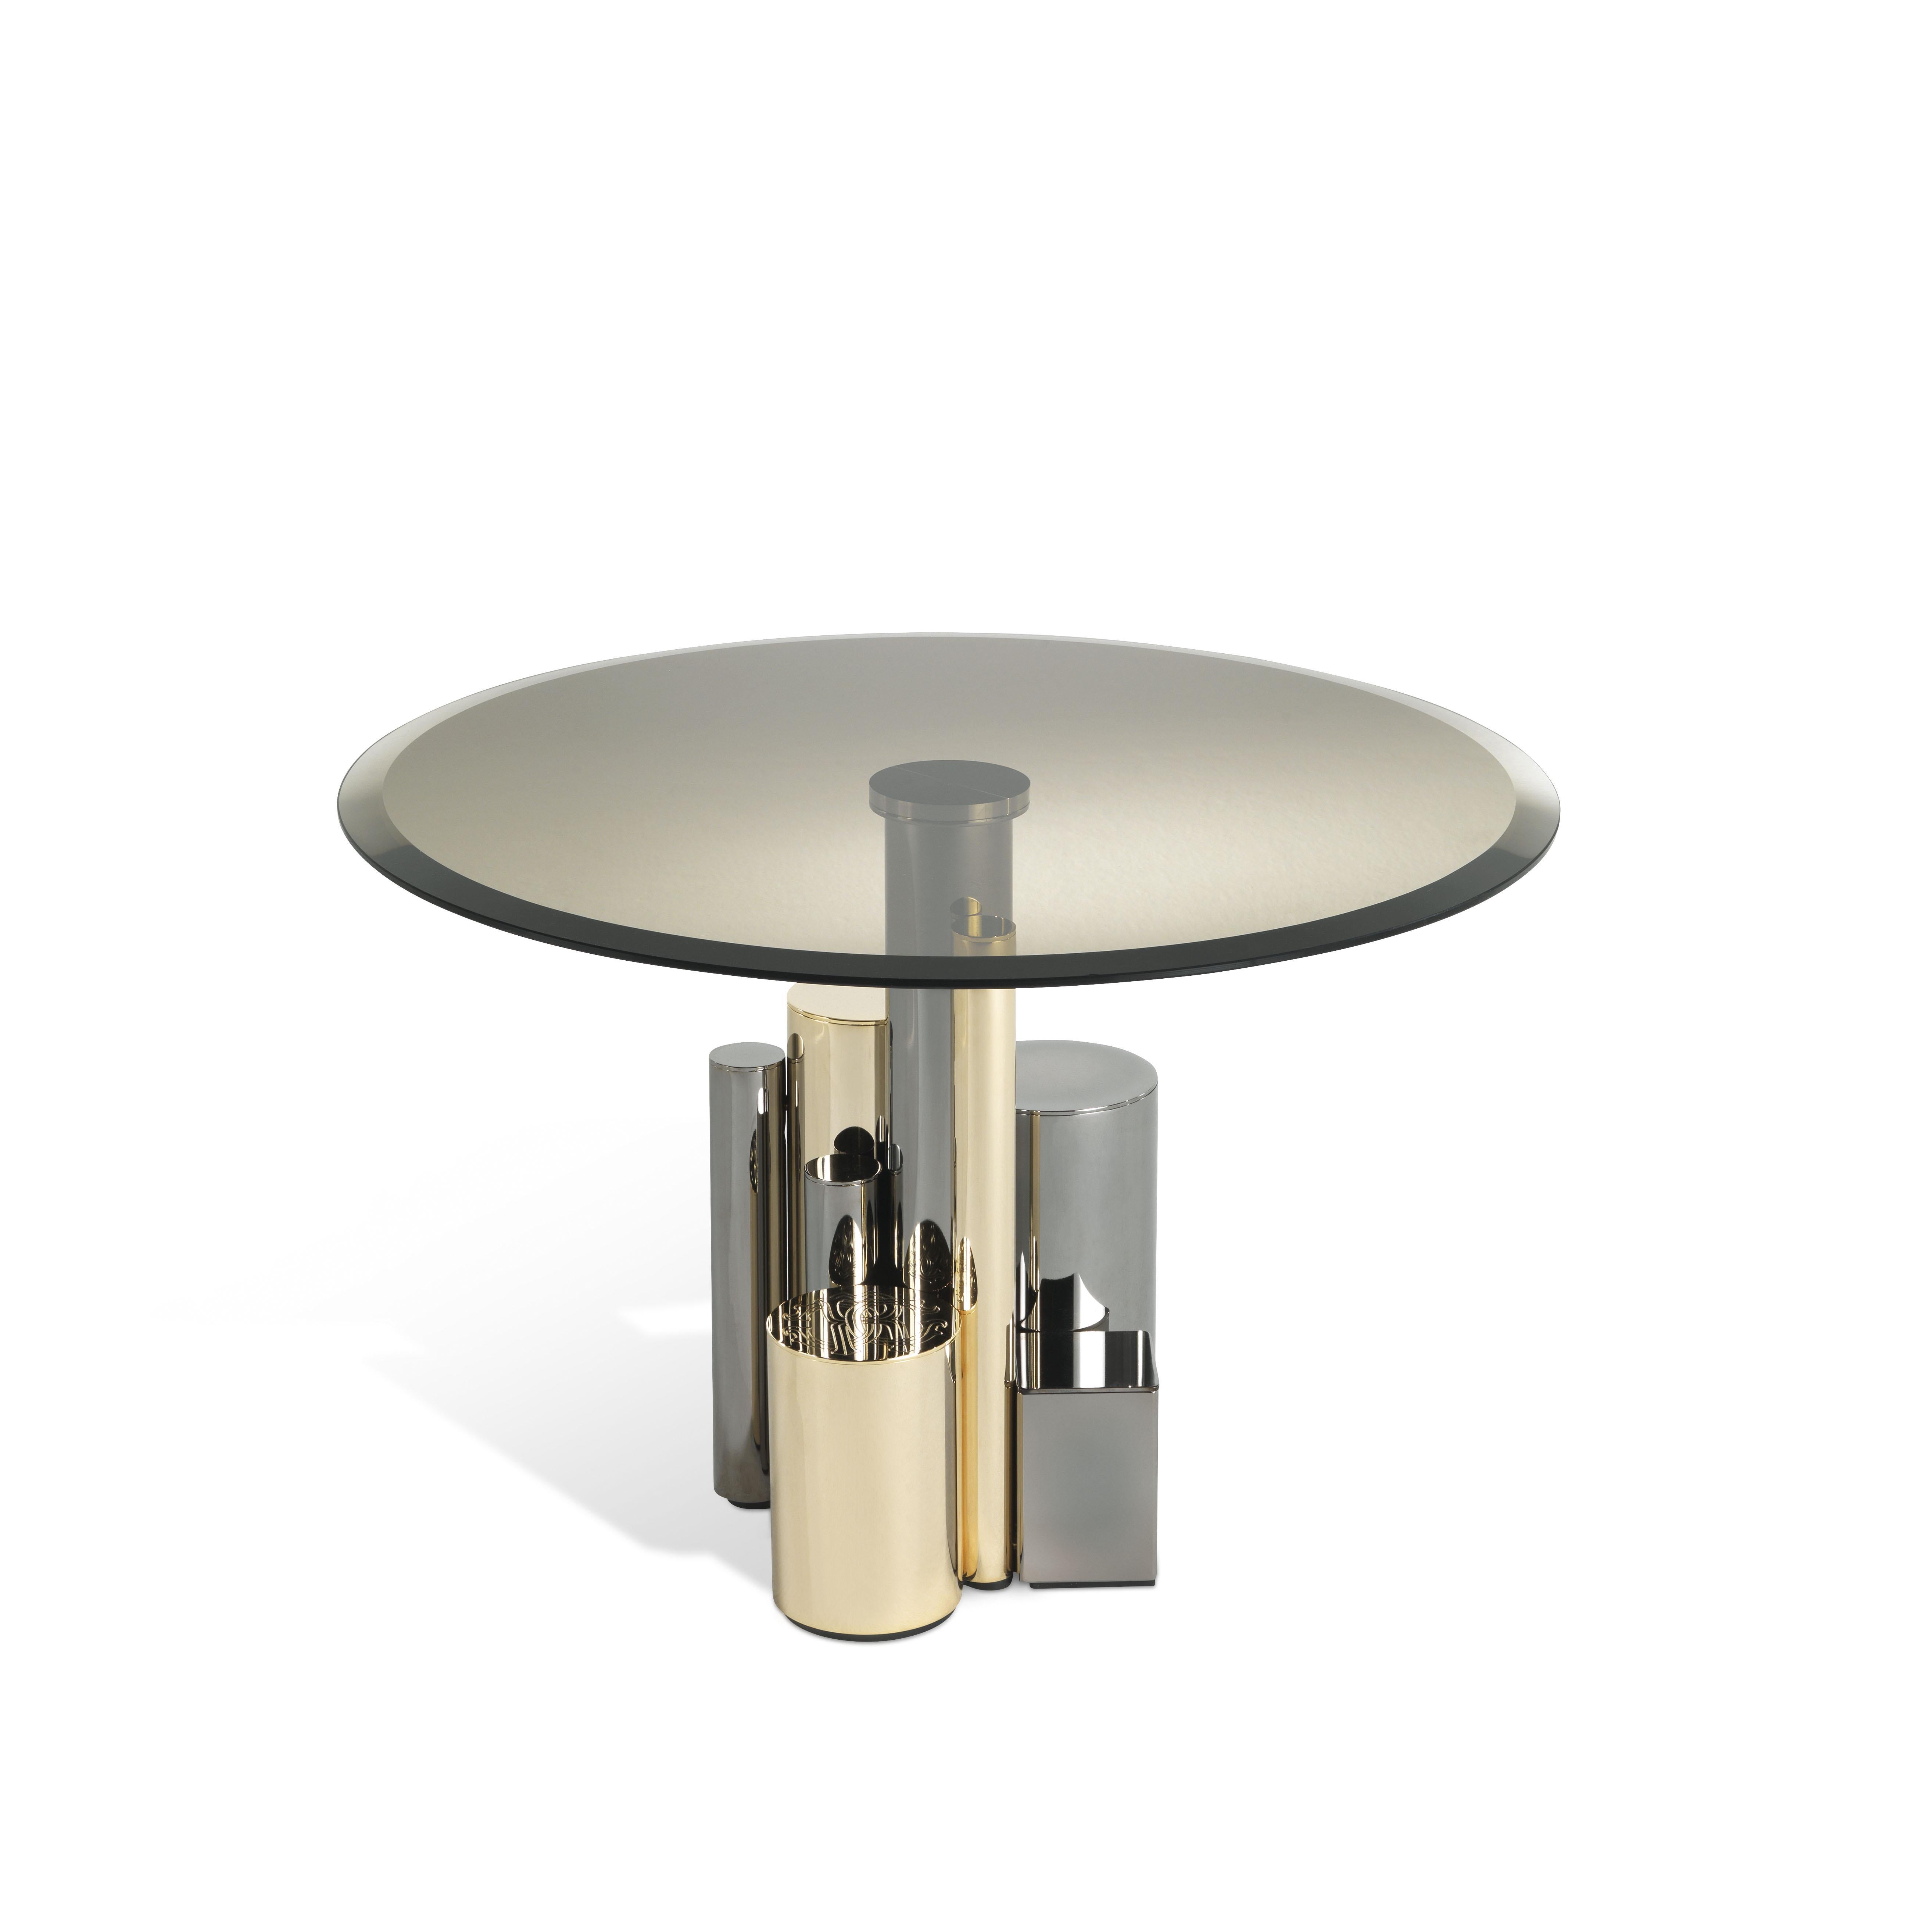 Contemporary lines and precious materials for Antigua side table. The base is created by a combination of different materials and colors: a sculptural composition consisting of metal elements with different thicknesses, heights, and finishes that